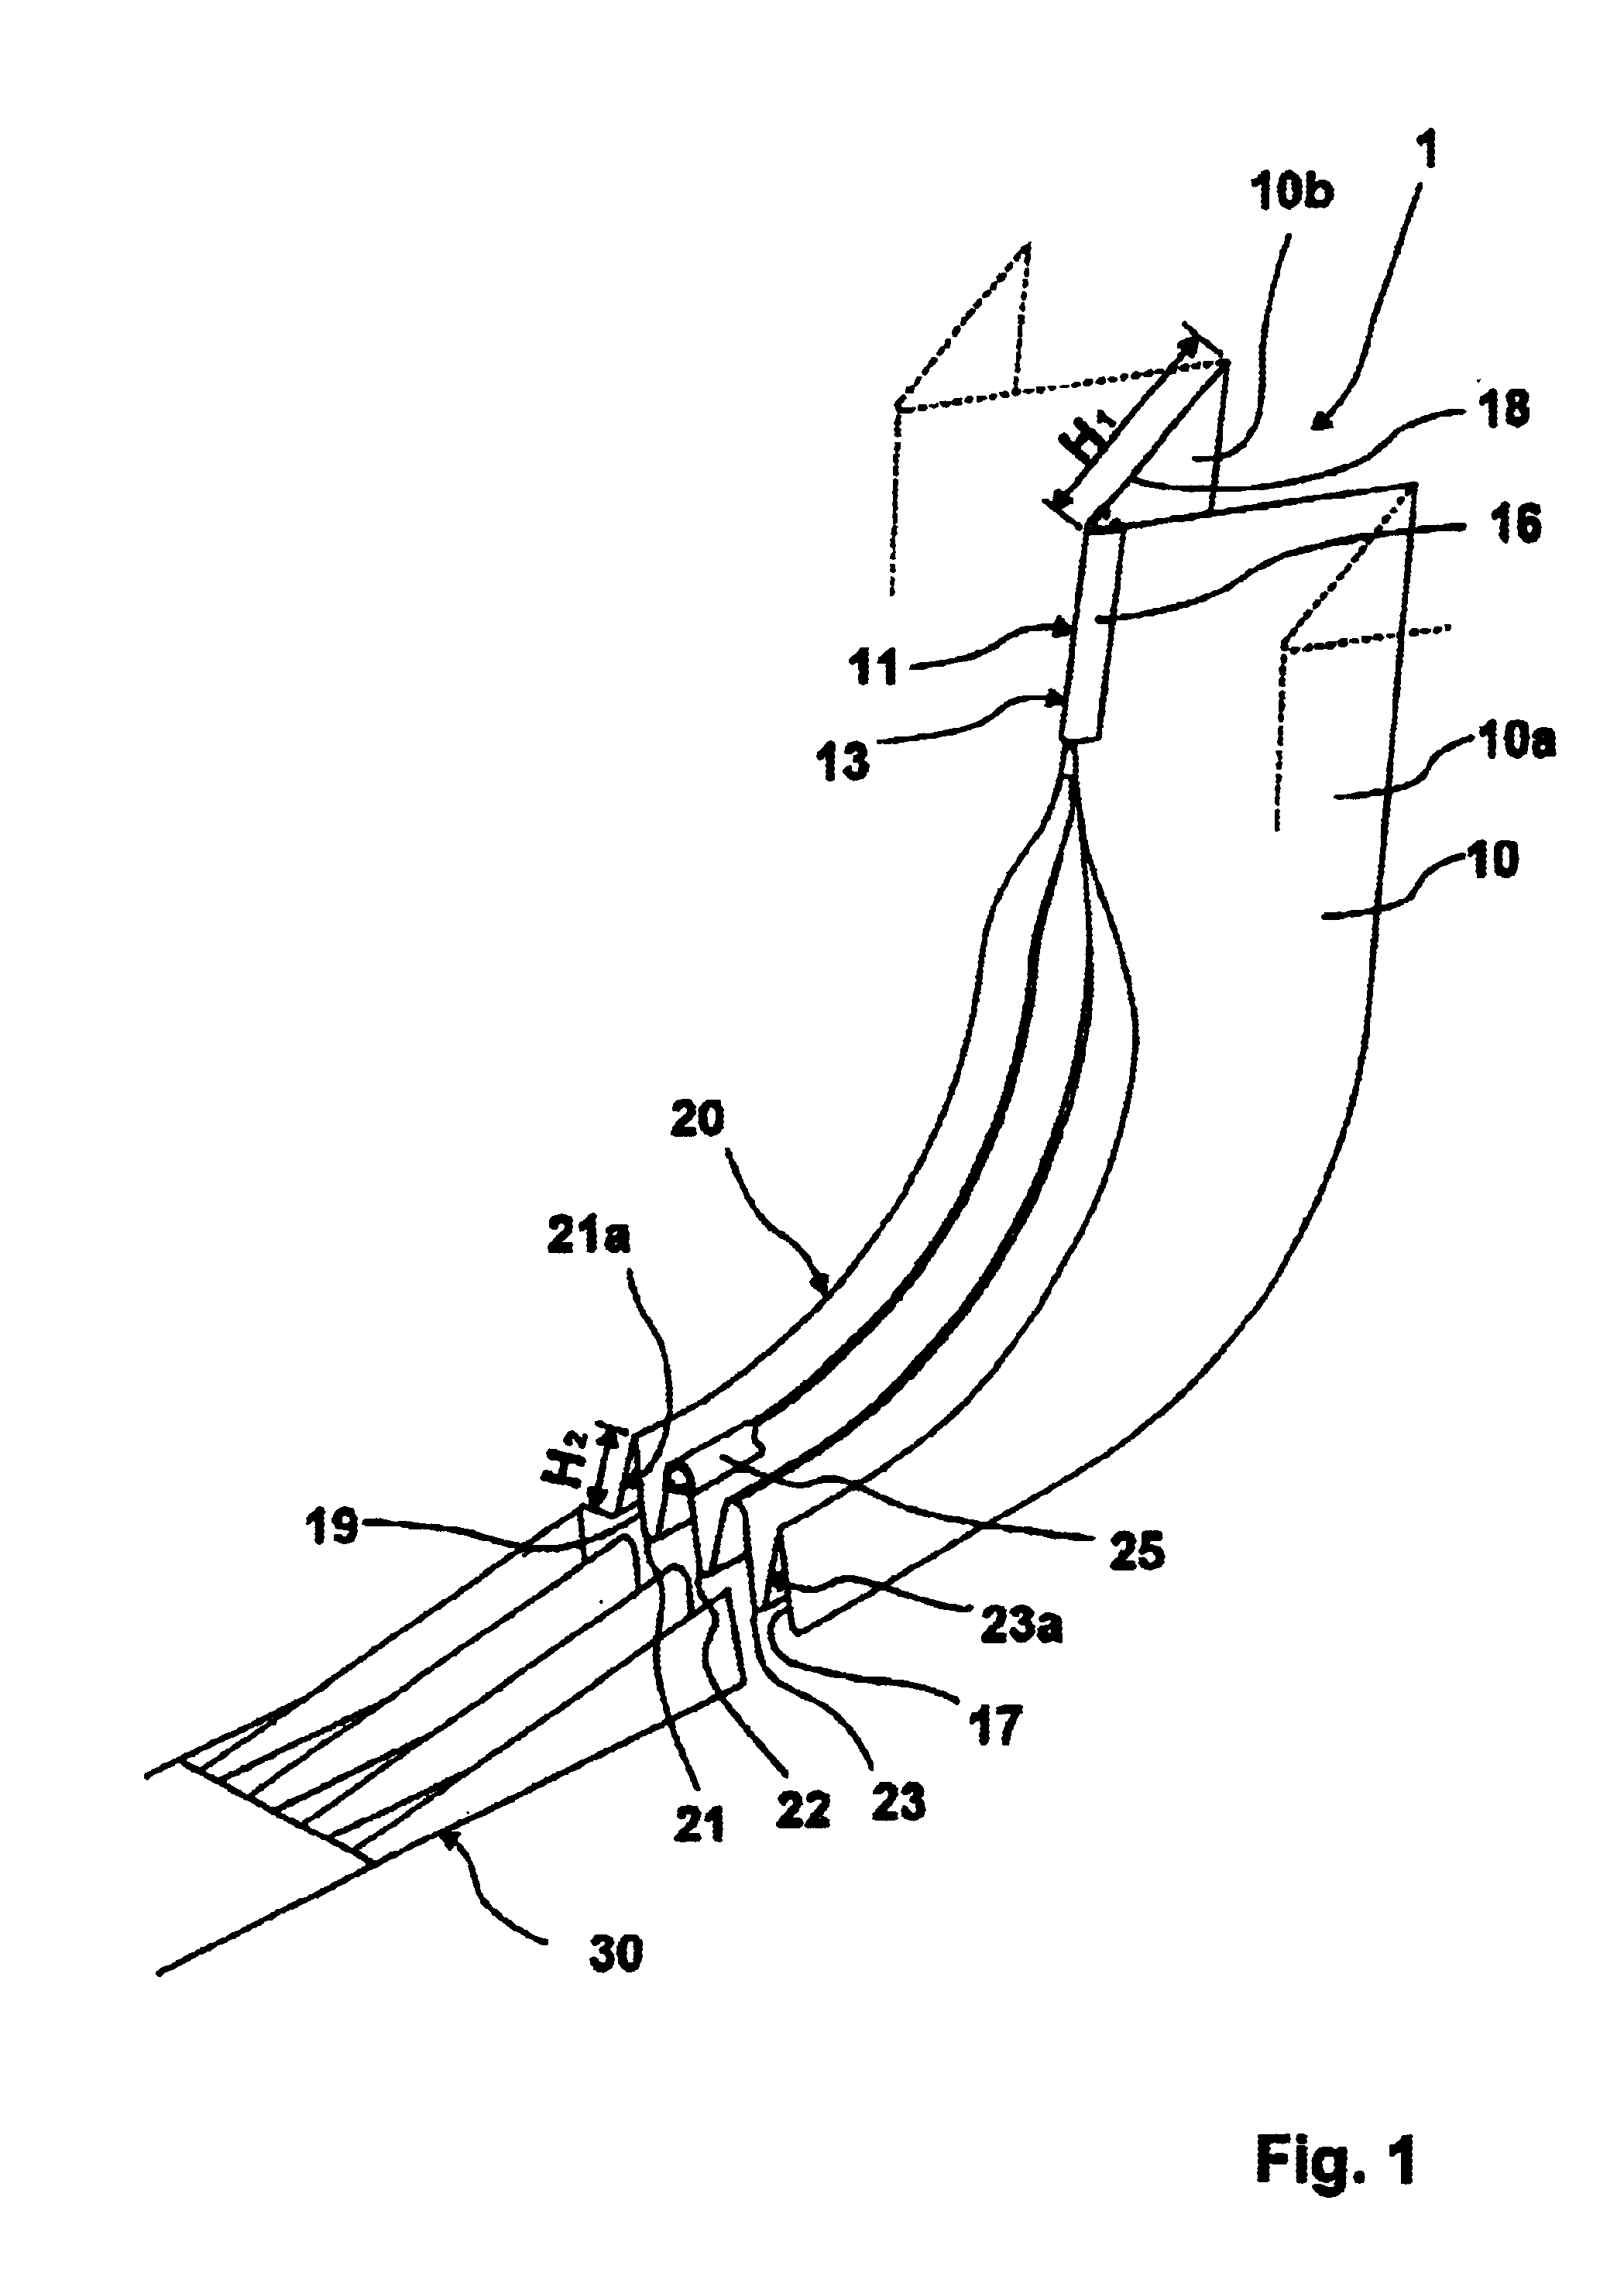 Pleat or corrugation of a bellows of a connection between two hinge-linked vehicles or vehicle sections e.g., of an articulated bus